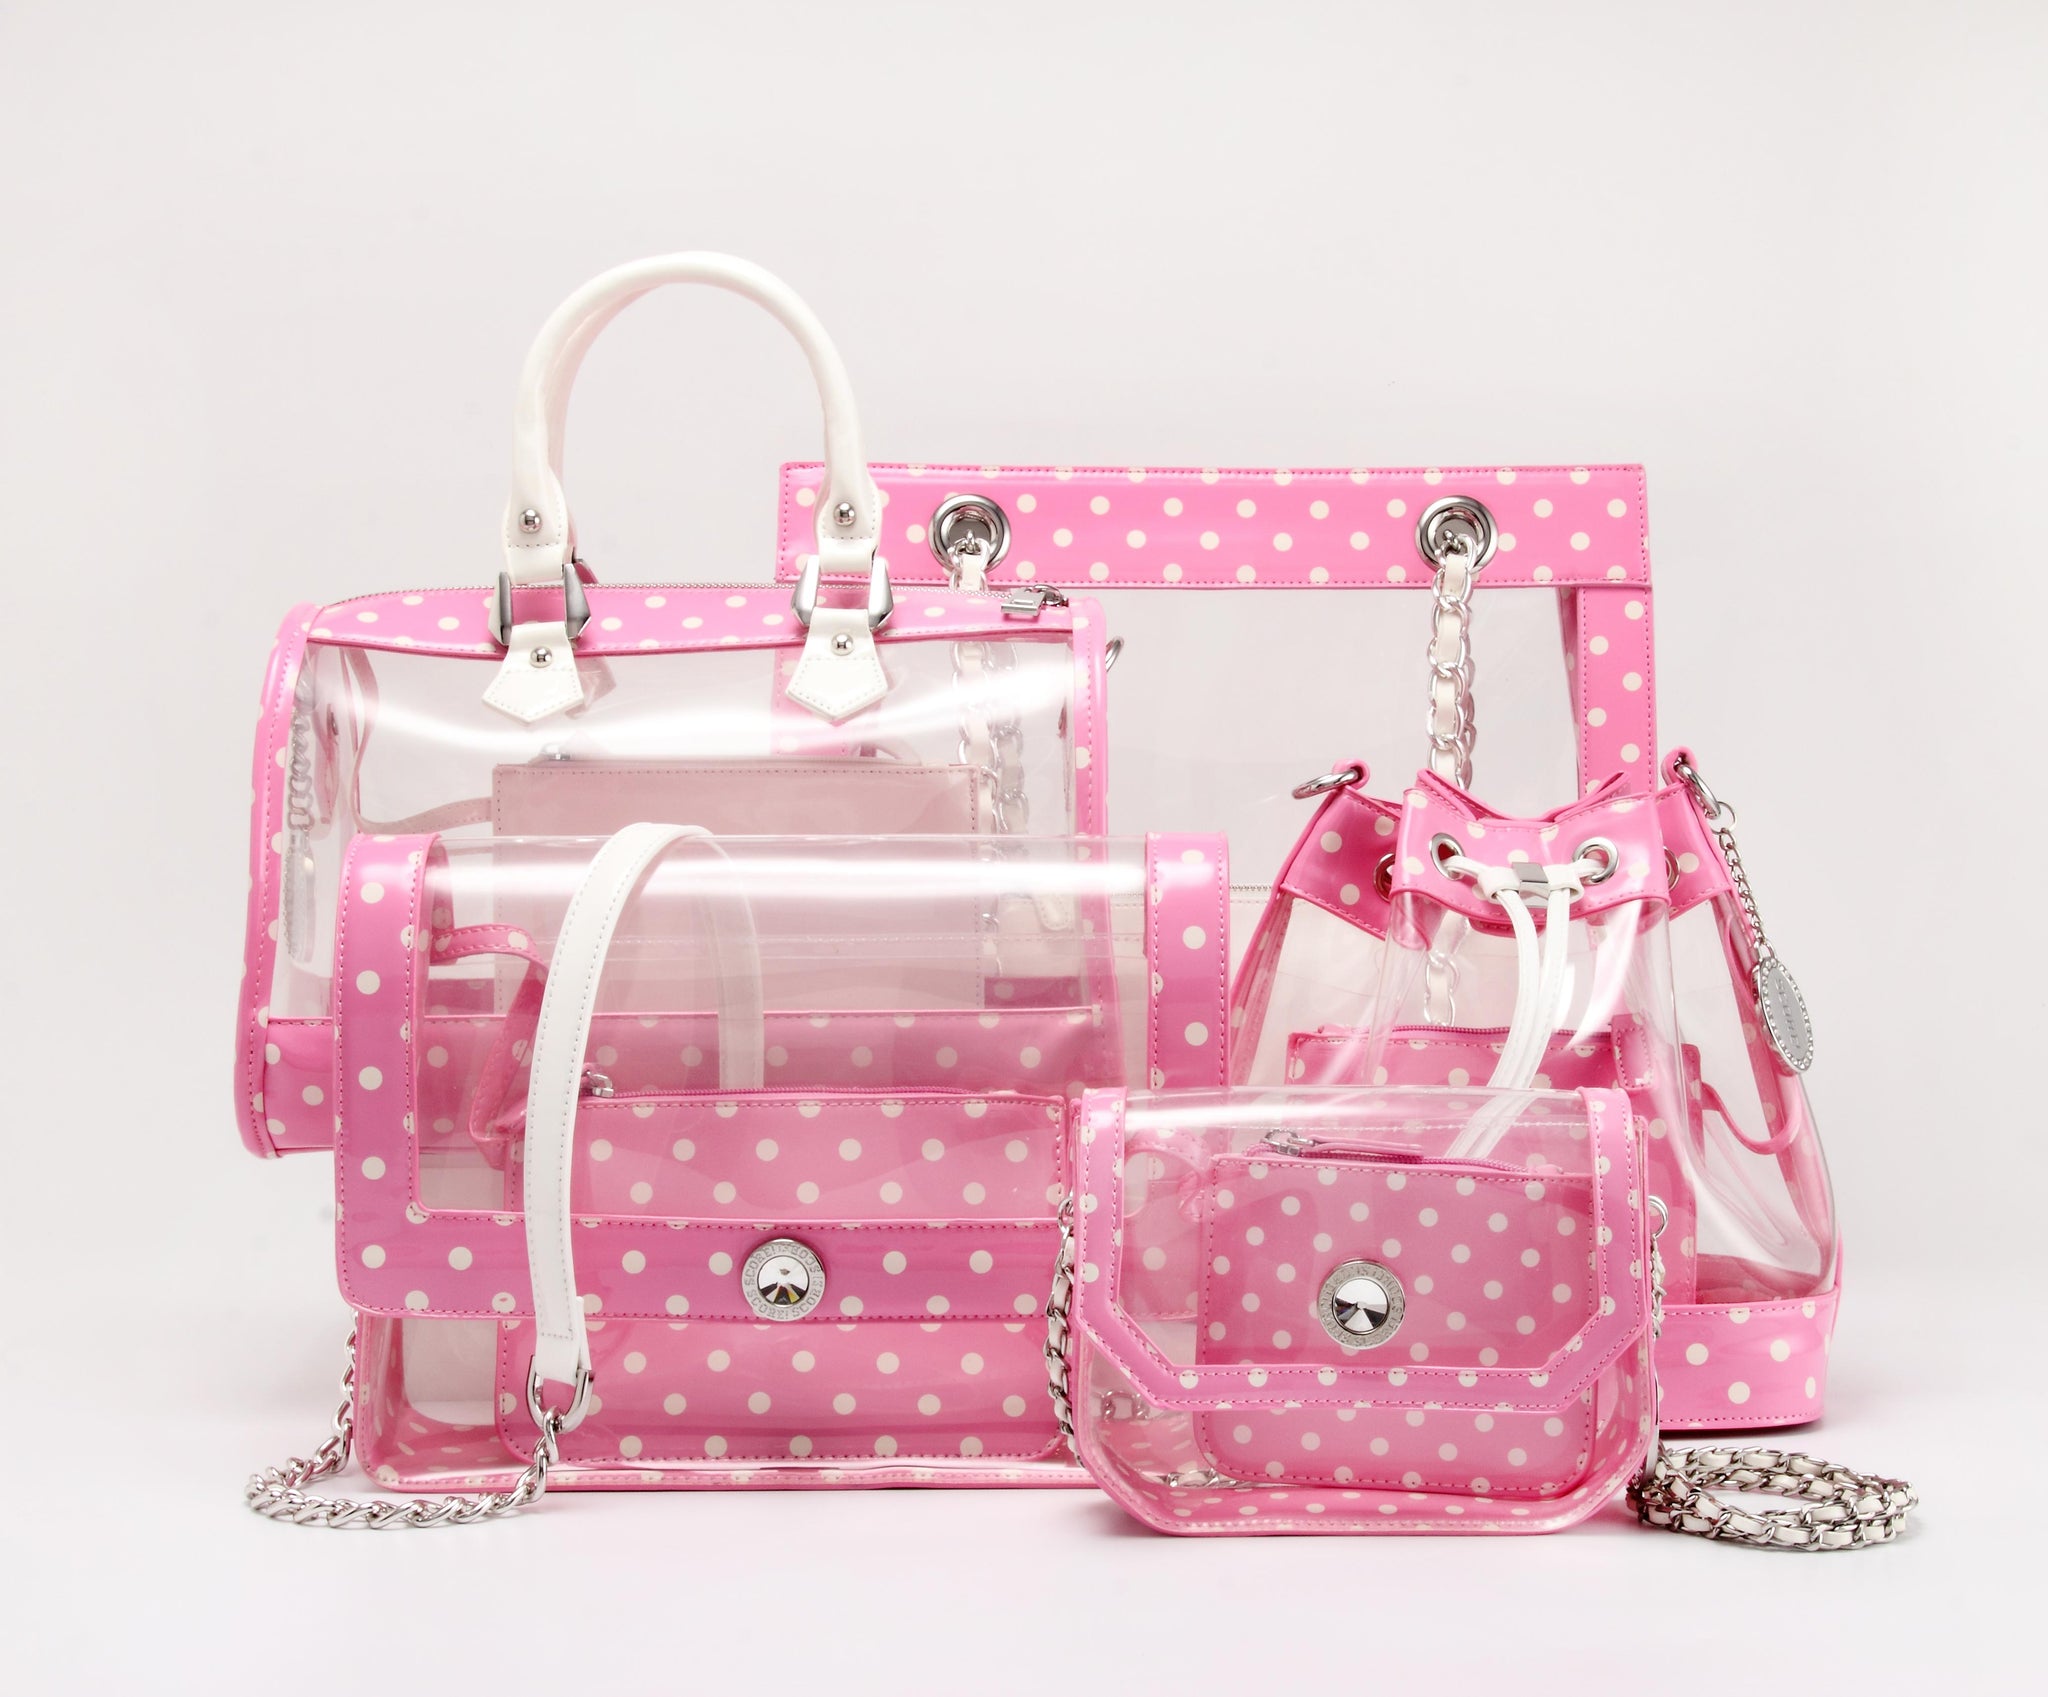 Princess Sequin Crossbody Handbag For Kids Pink, Small Round Sequin  Shoulder Bag With Coin Purse And Lovely Bow Detail R231023 From Dafu05,  $11.37 | DHgate.Com